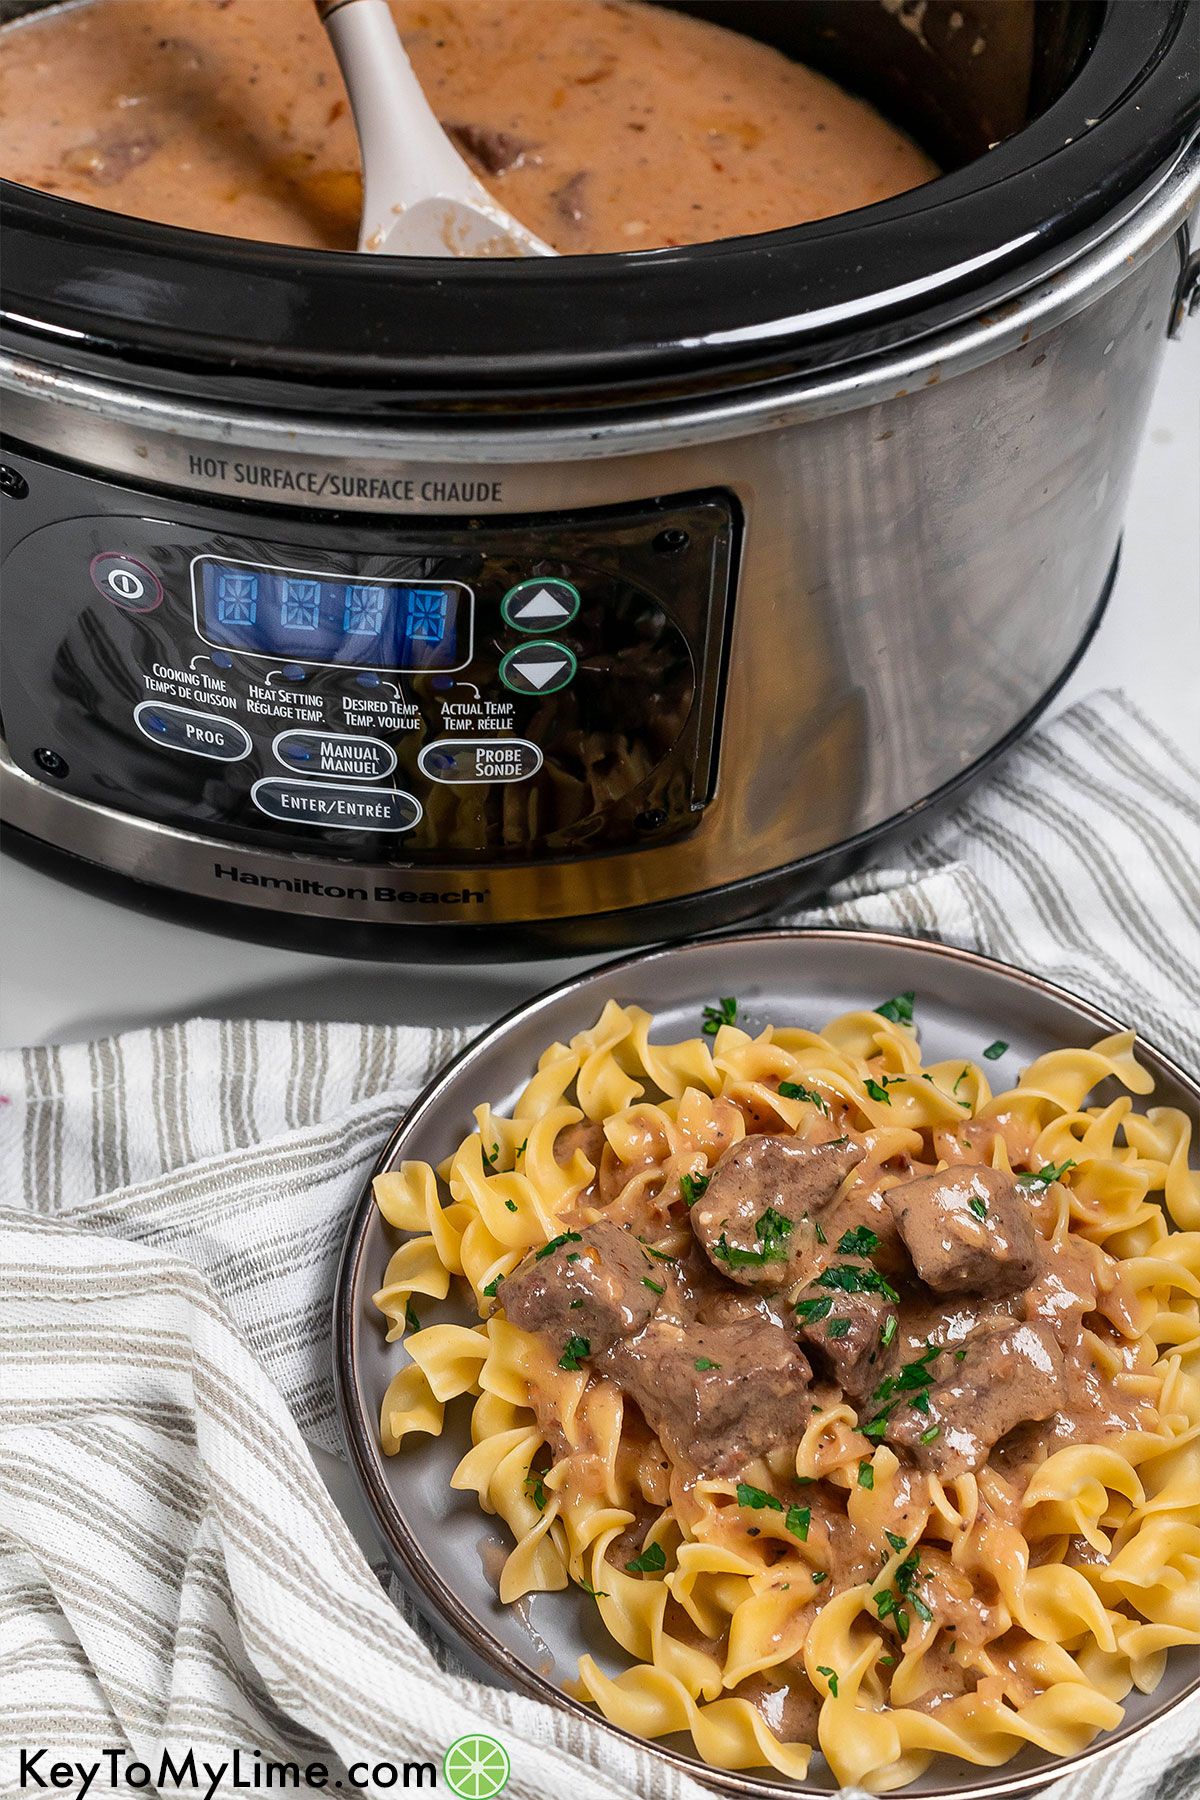 Crockpot beef tips plated on egg noodles with a crockpot in the background.